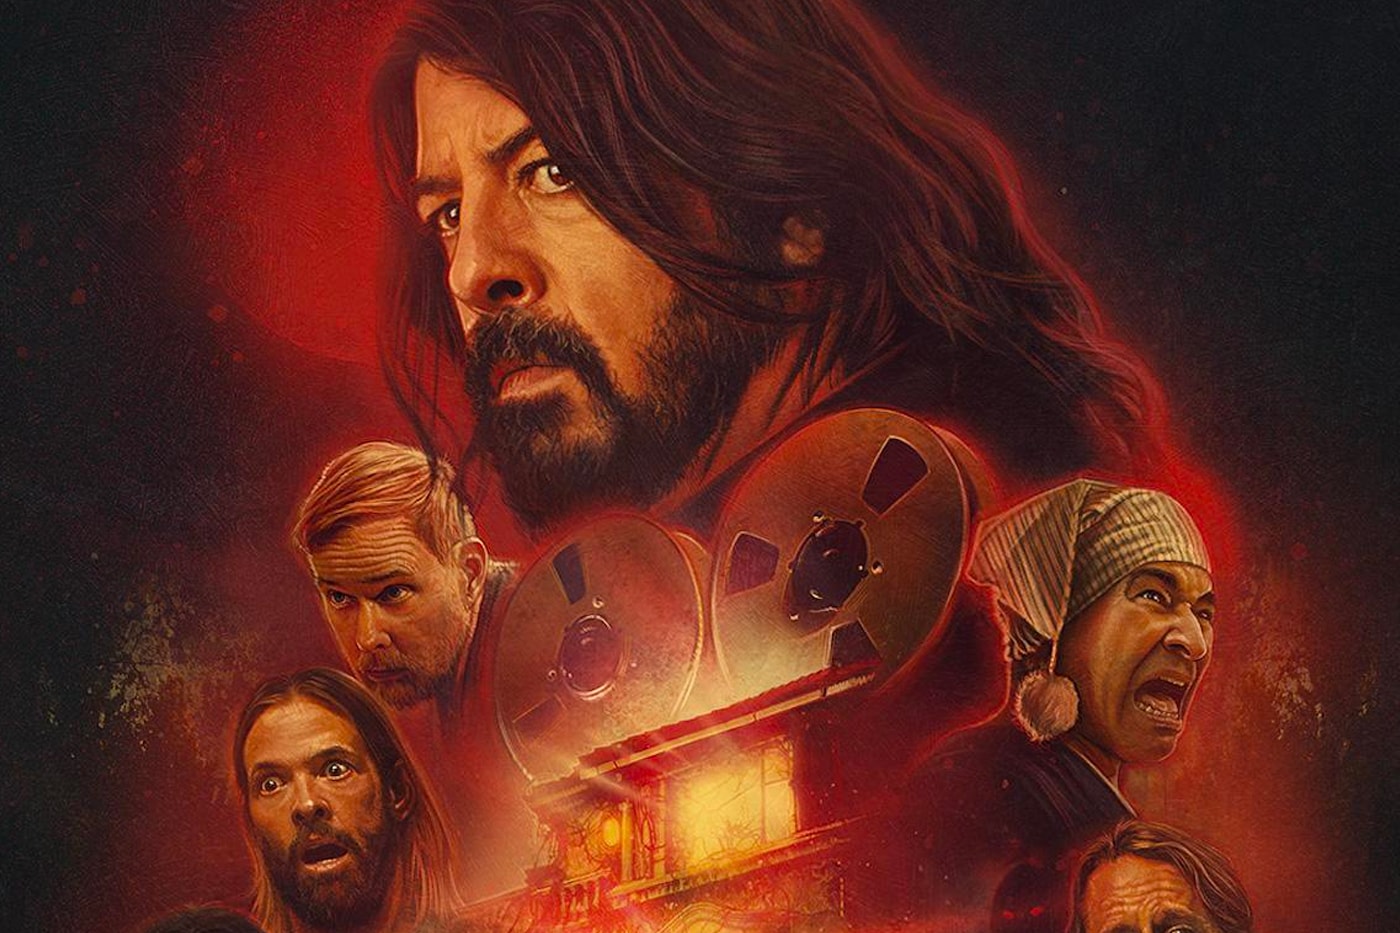 Foo Fighters Horror Comedy film Studio 666 casting news dave grohl 